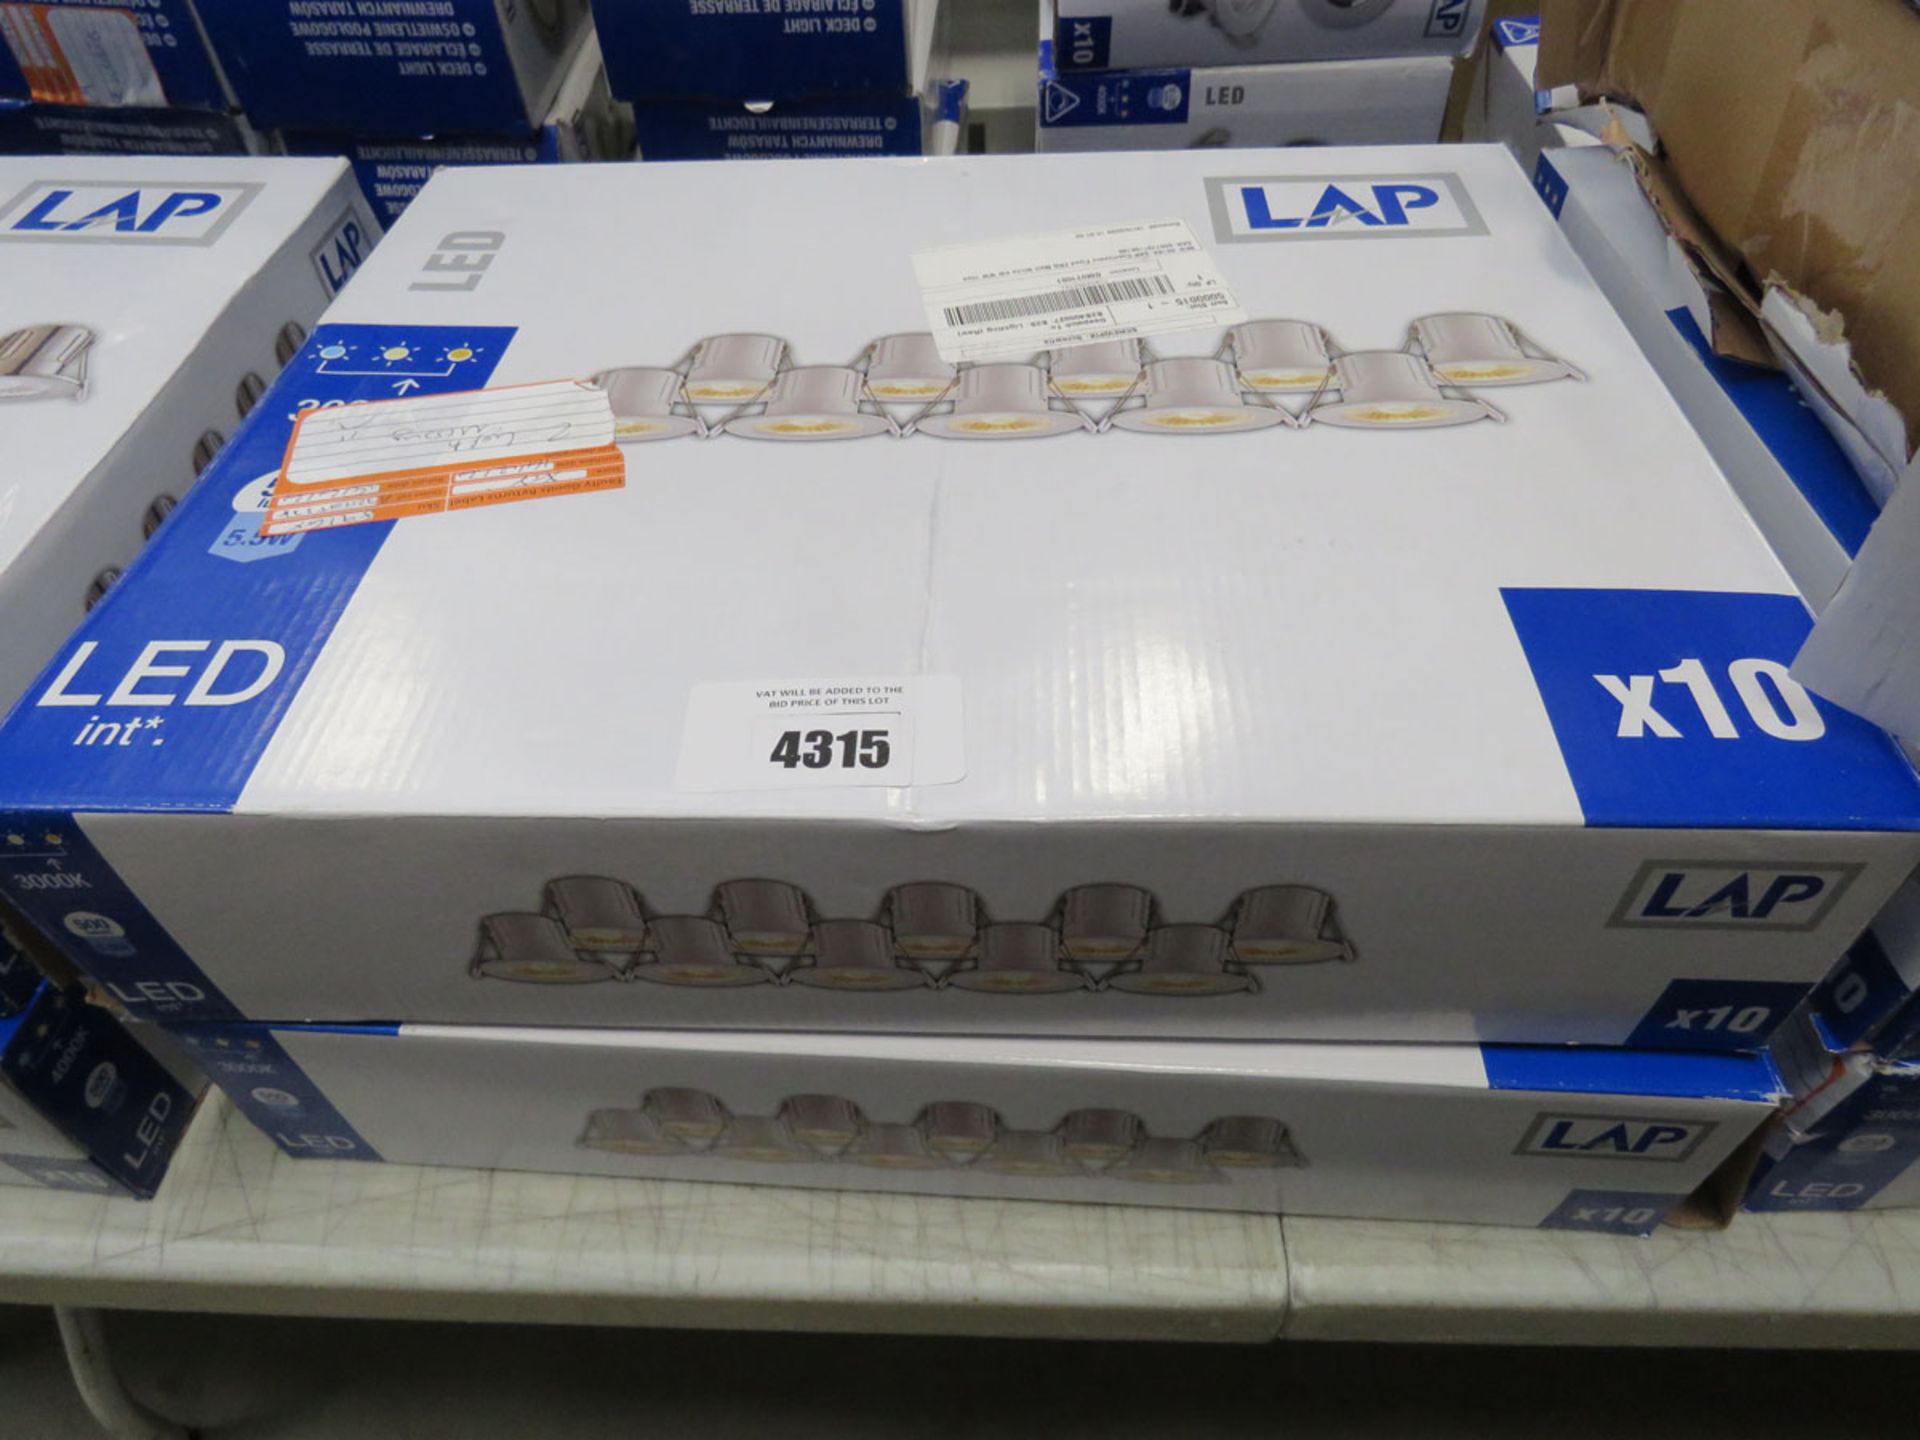 2 boxes of LAP LED down lights